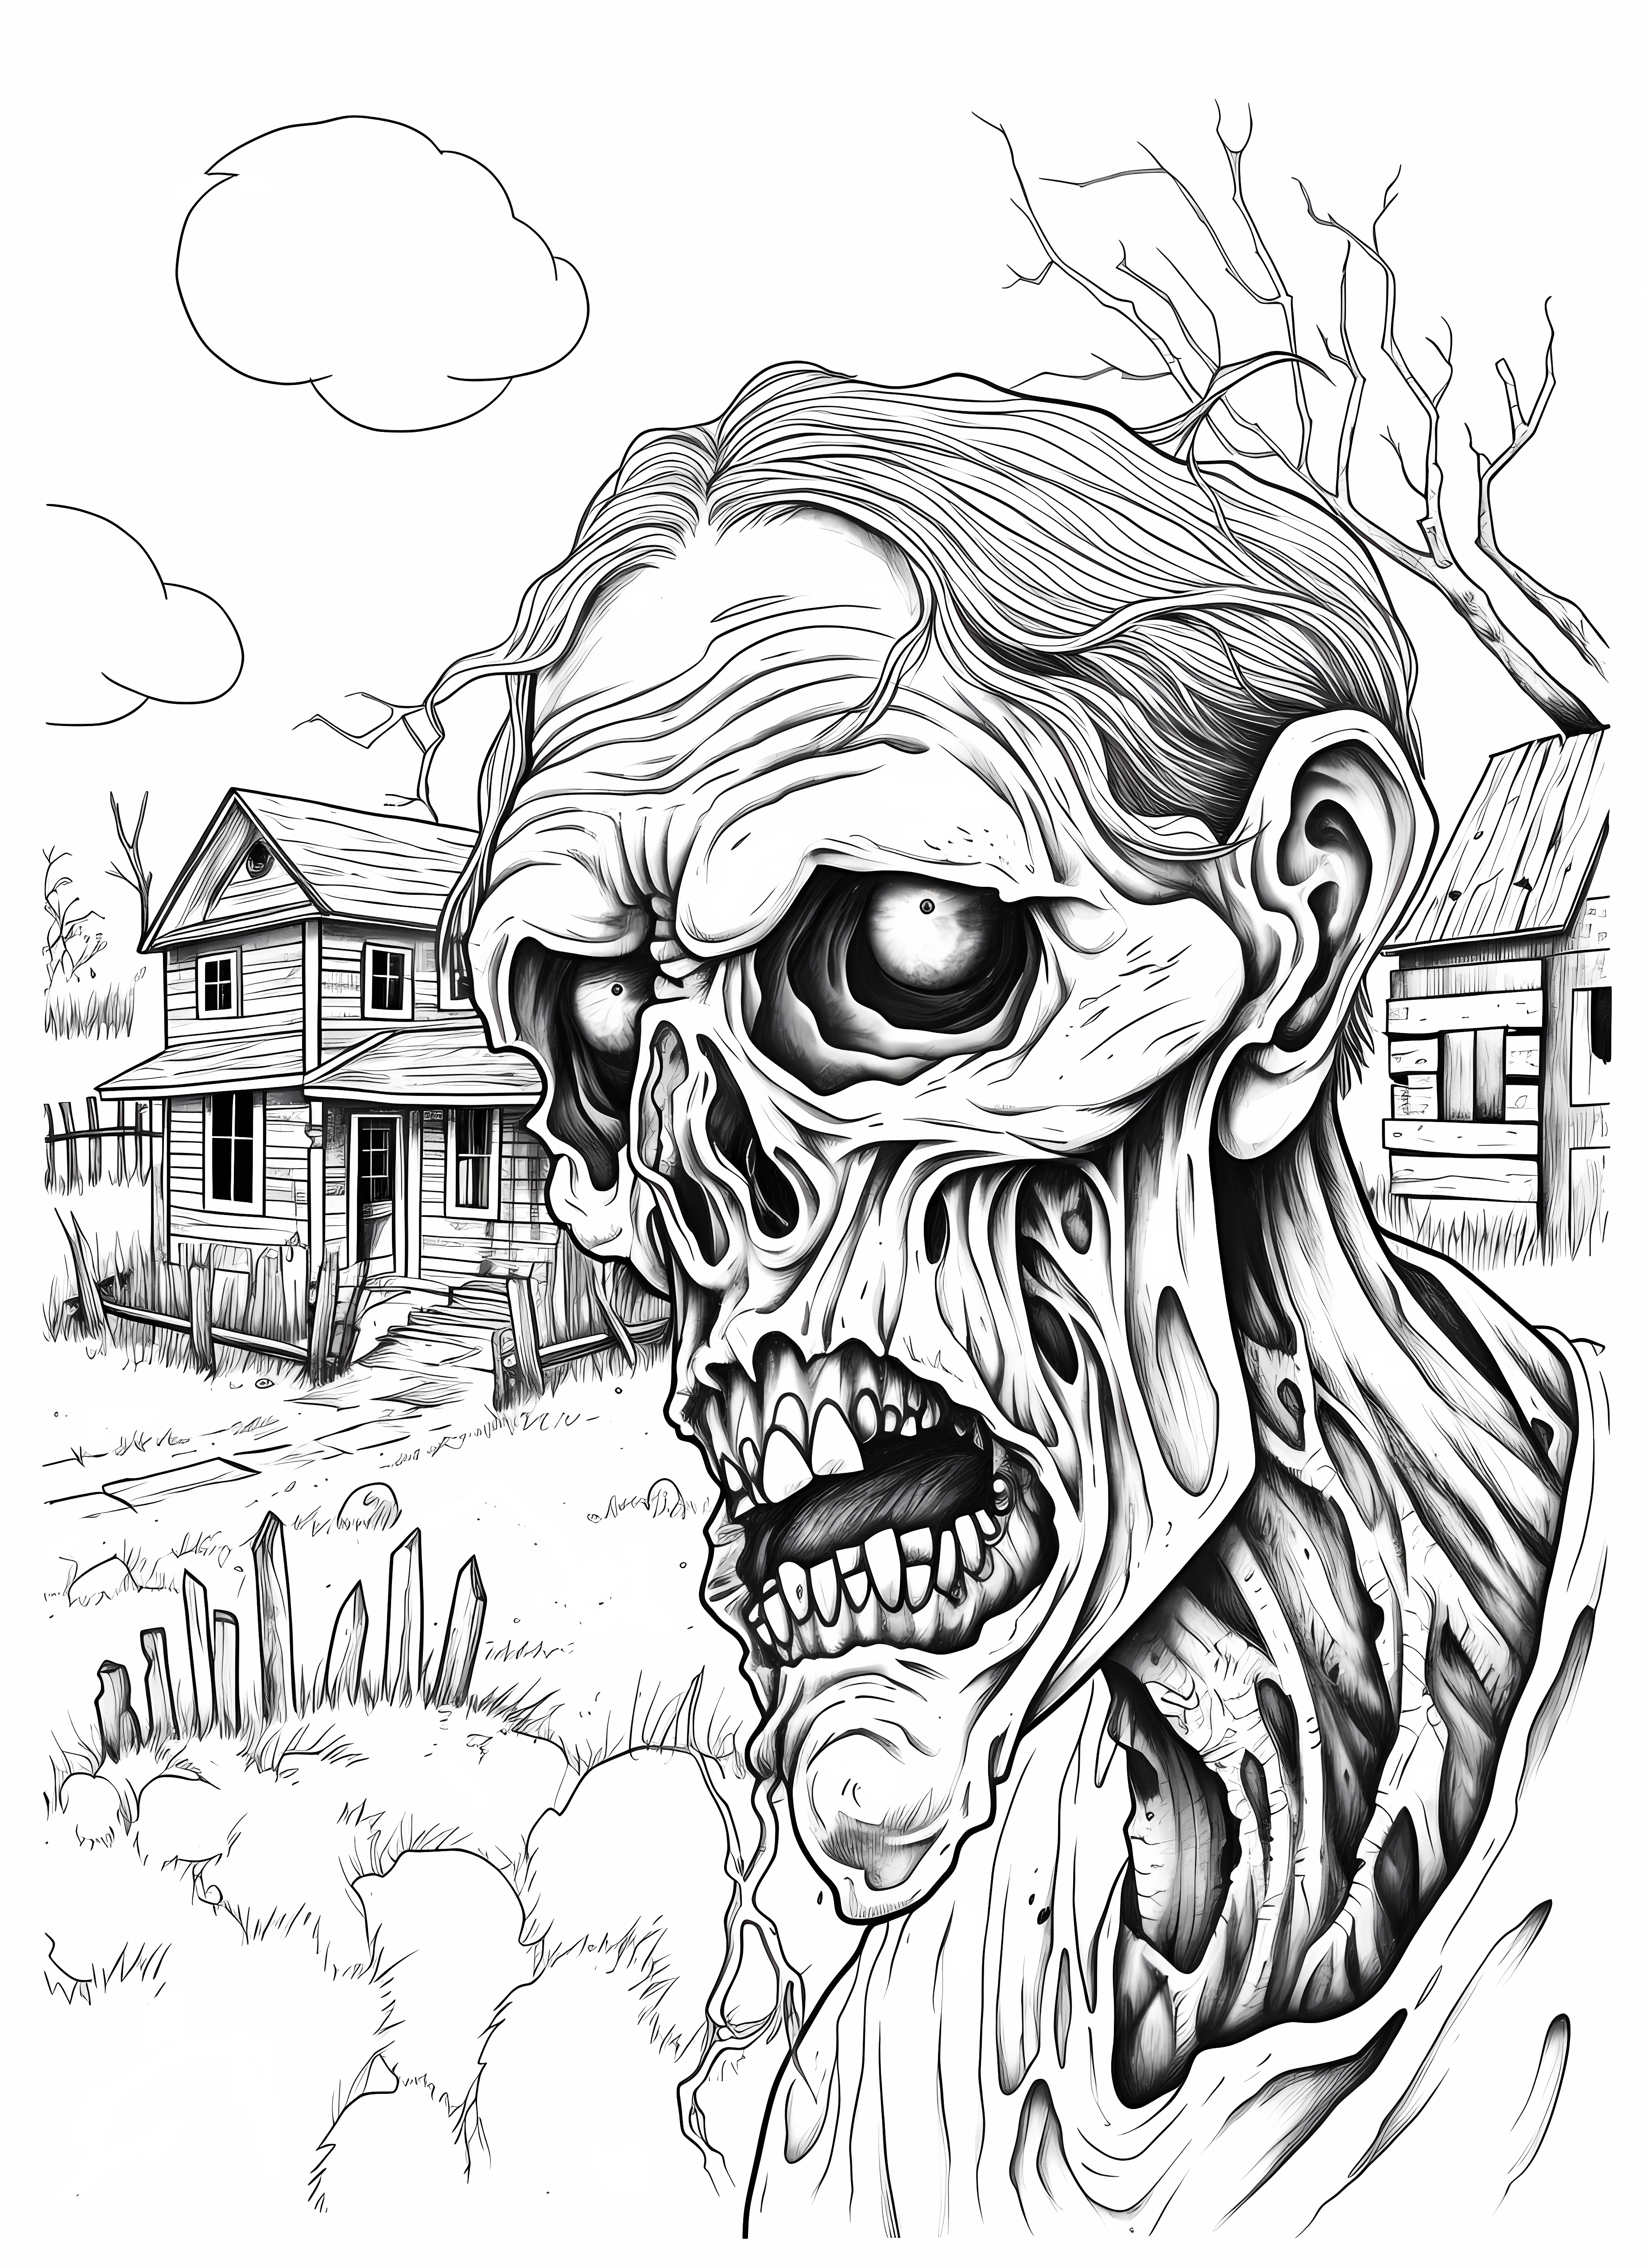 A couple of free pages from my latest coloring book creepy zombies rcoloringbookspastime